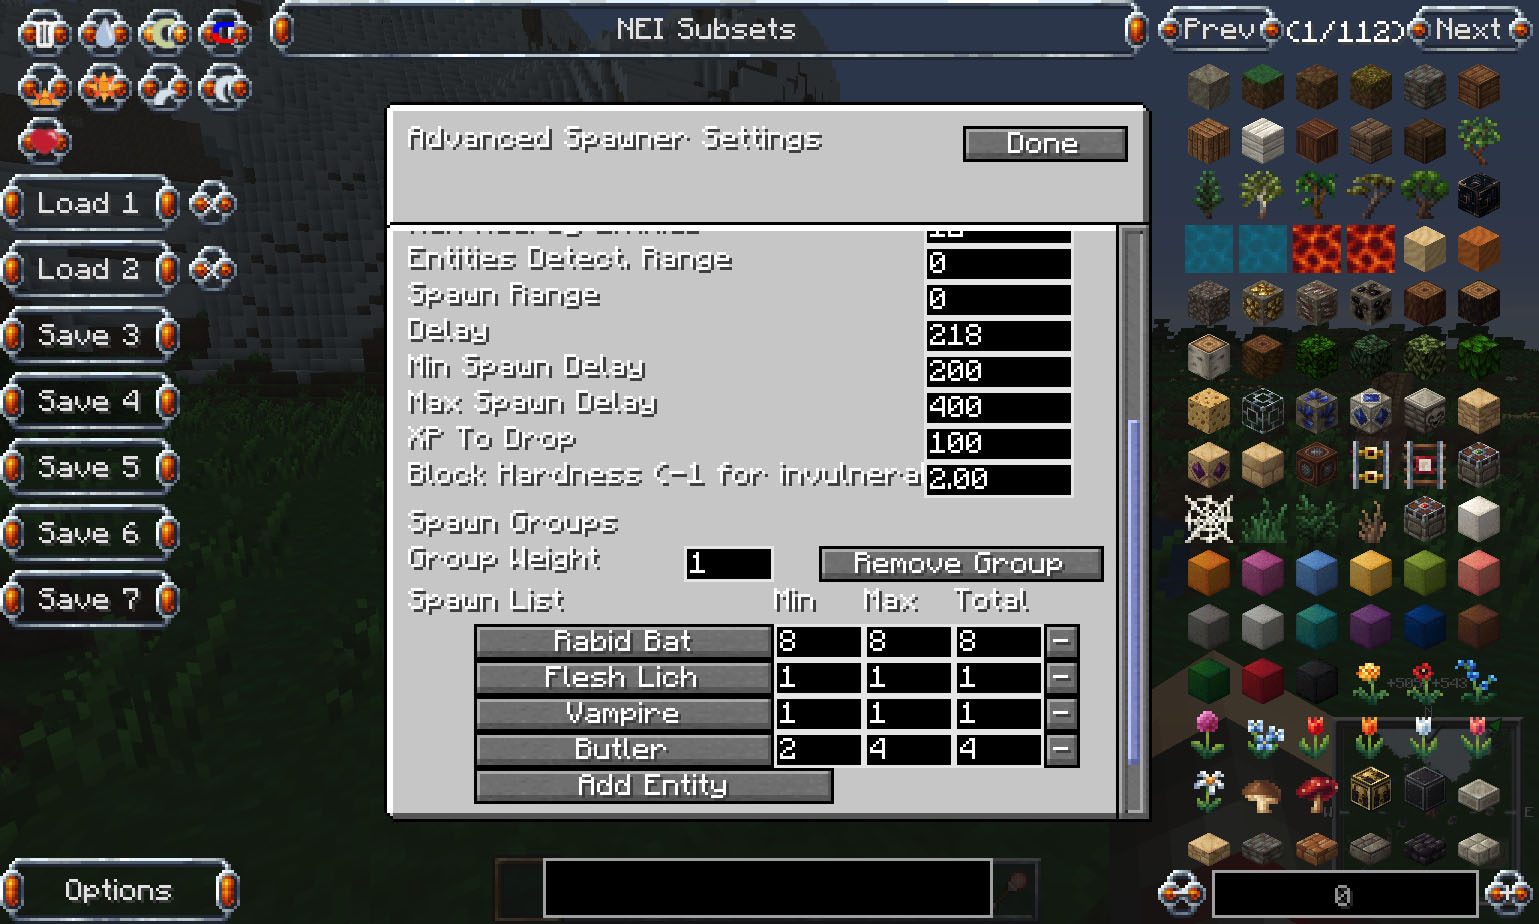 Complete example of settings